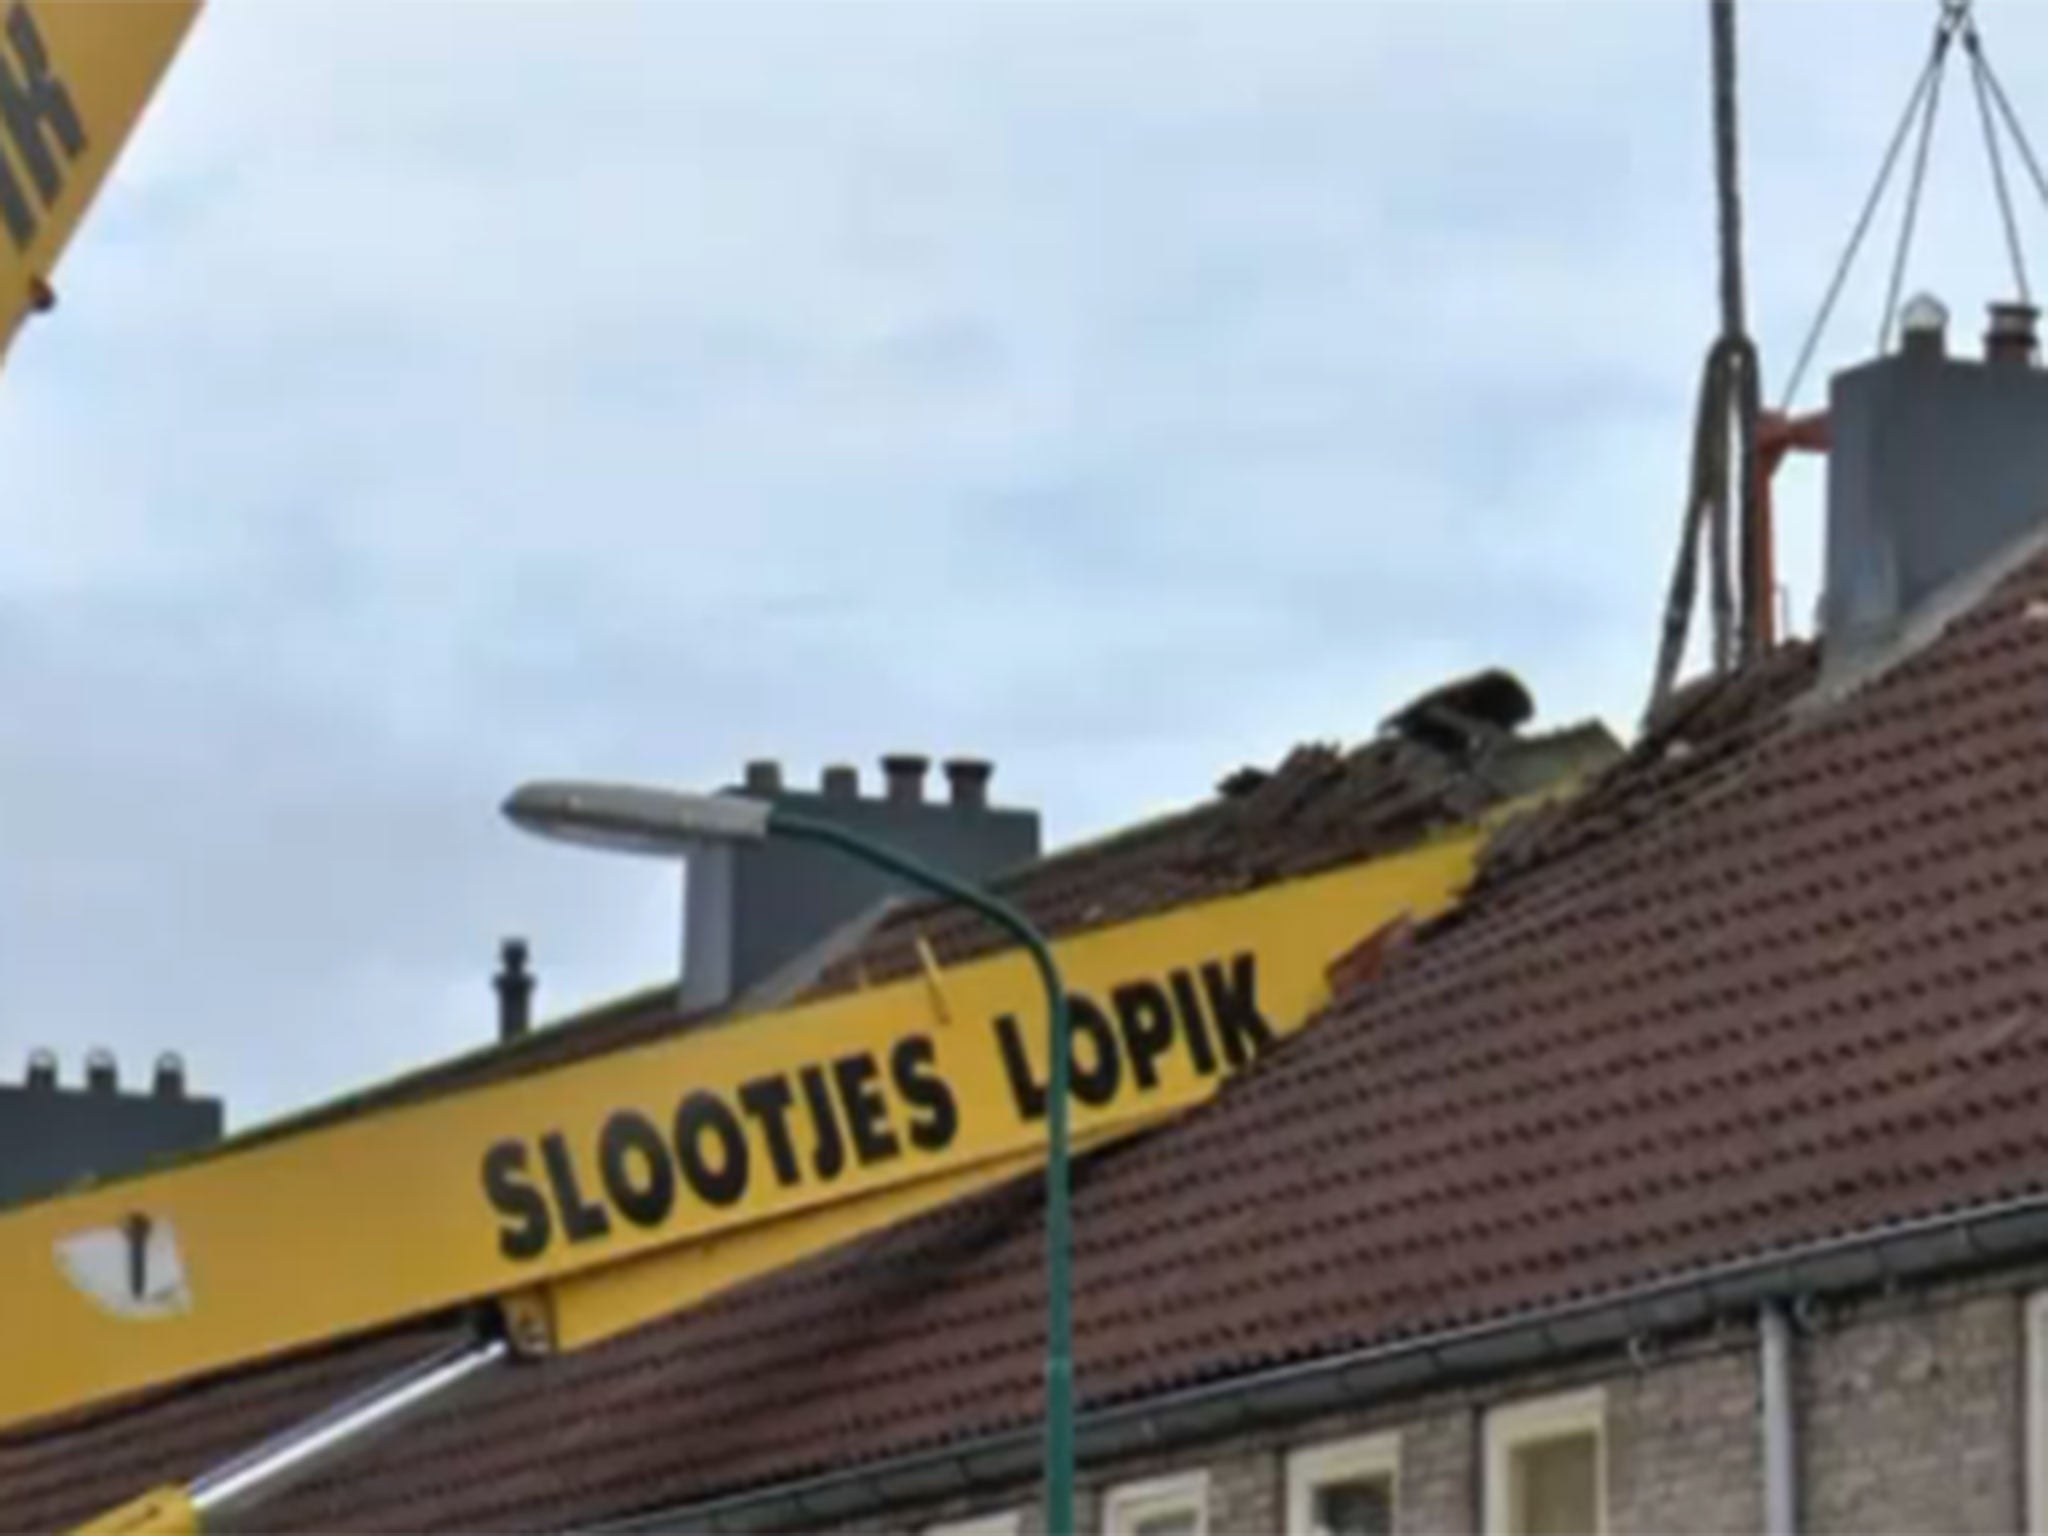 marriage proposal fails after crane hits neighbour's roof